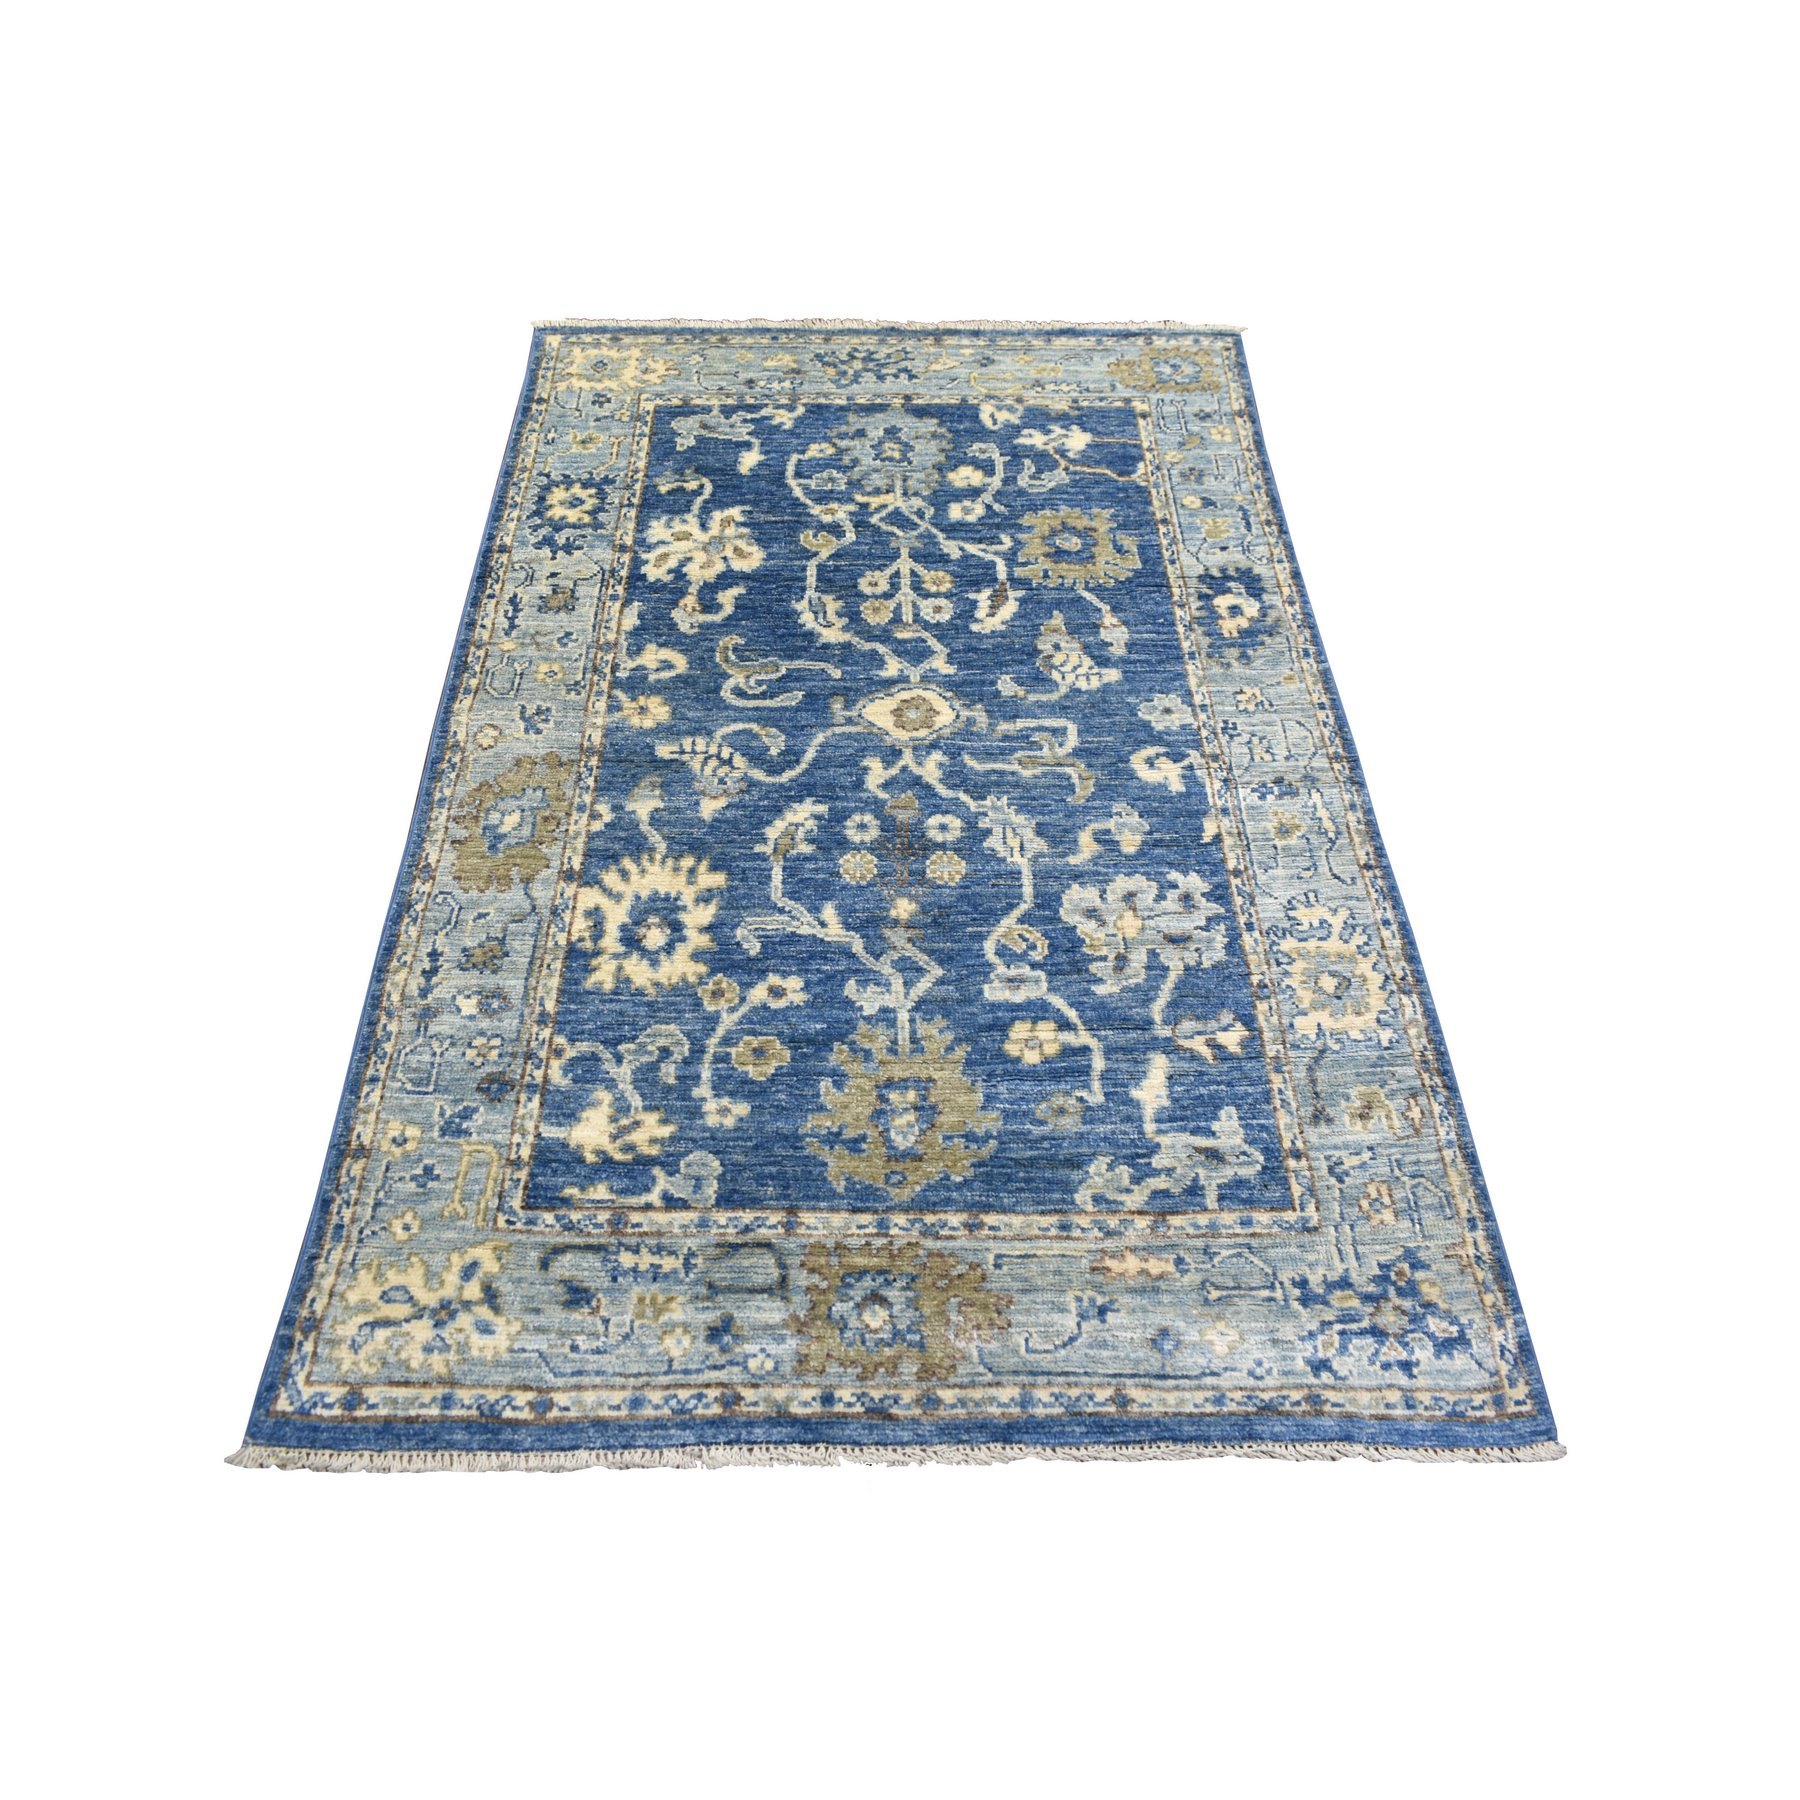 3'10"x6' Denim Blue Angora Oushak With Colorful Leaf Design Natural Dyes, Afghan Wool Hand Woven Oriental Rug 